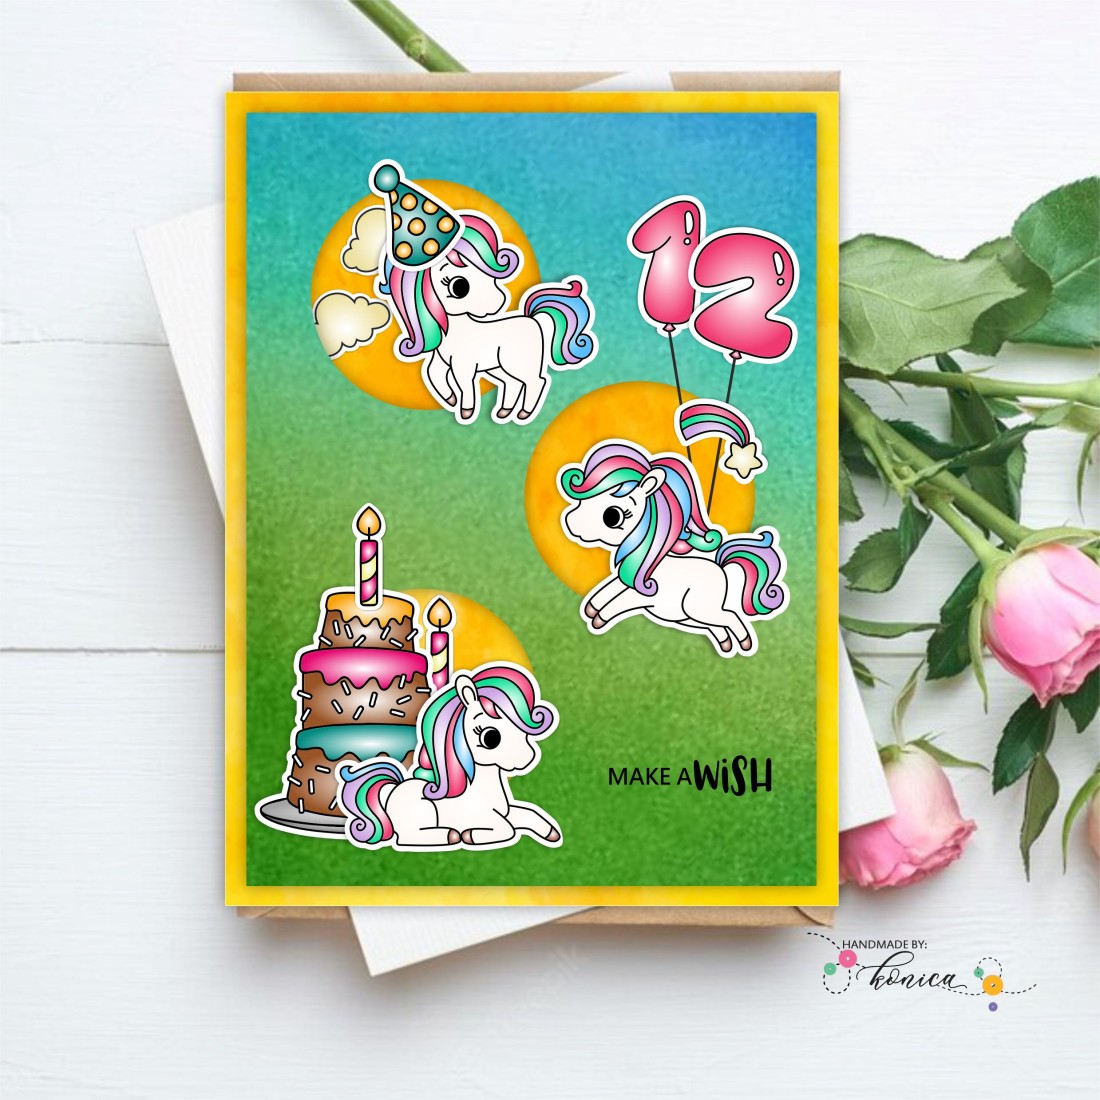 Craftyscrappers Stamps- LITTLE PONY BIRTHDAY